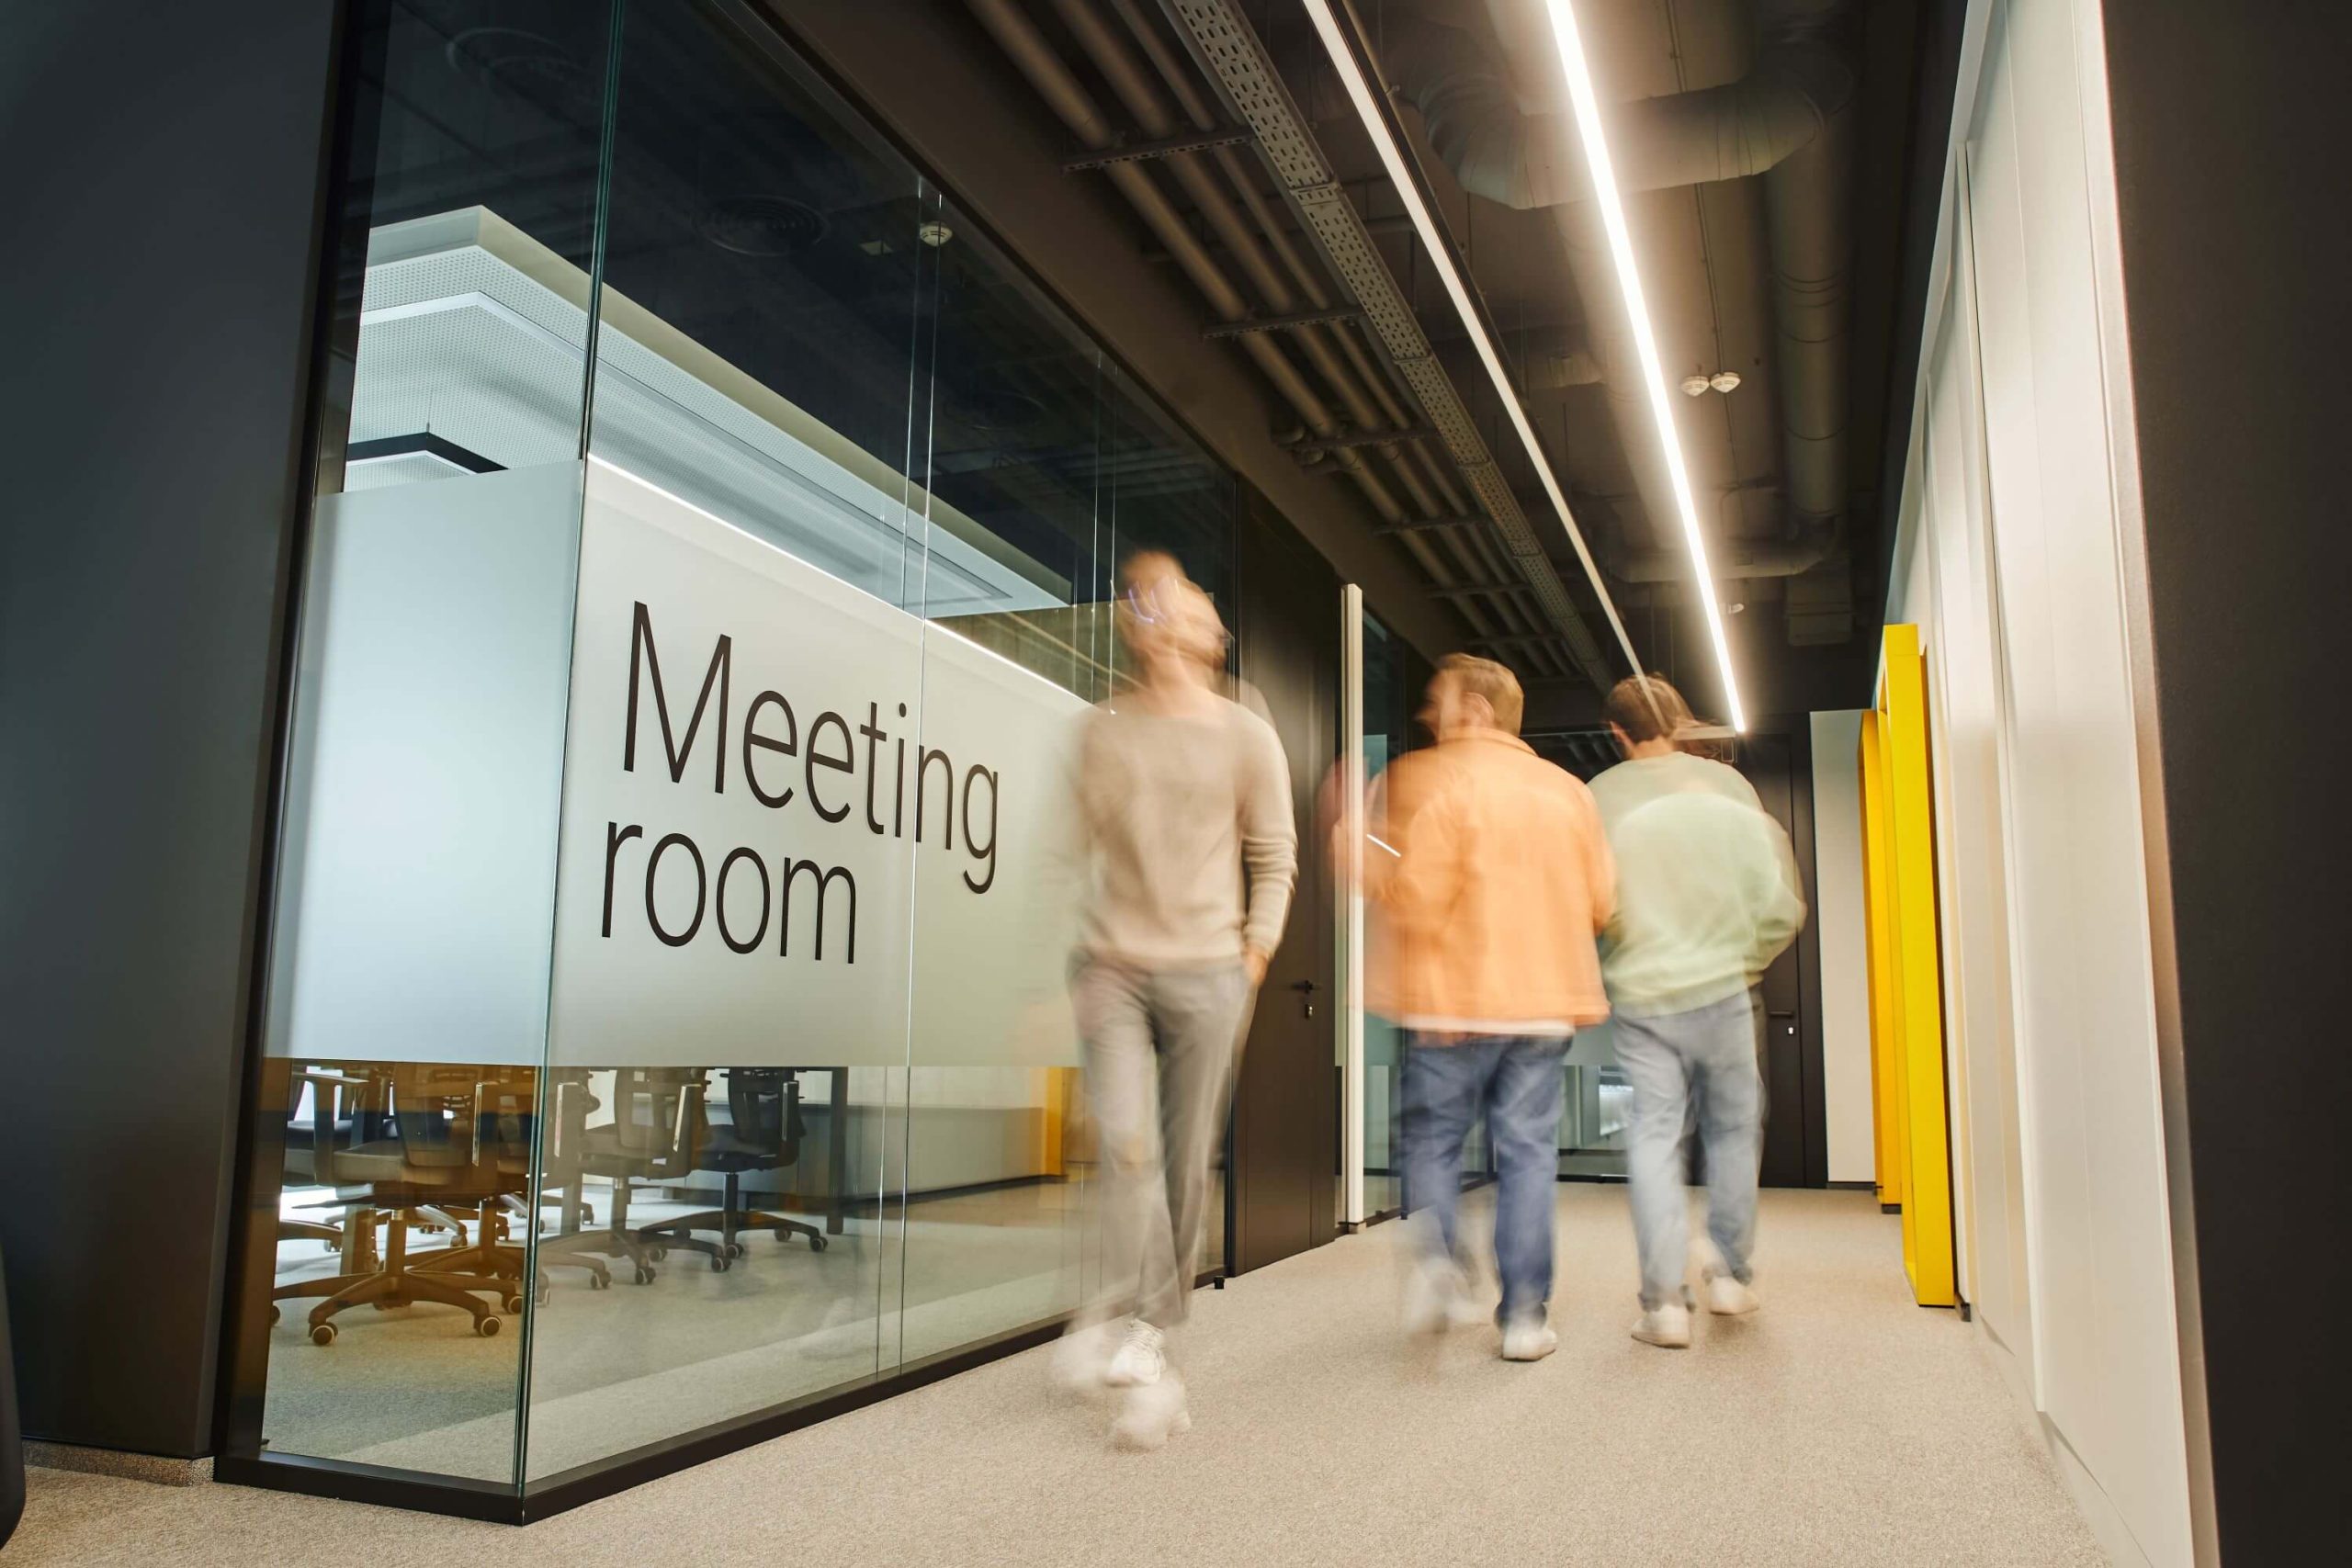 Meeting Room written on the wall with people walking by but camera blurred out with nice black highlights and colorful aurroundings